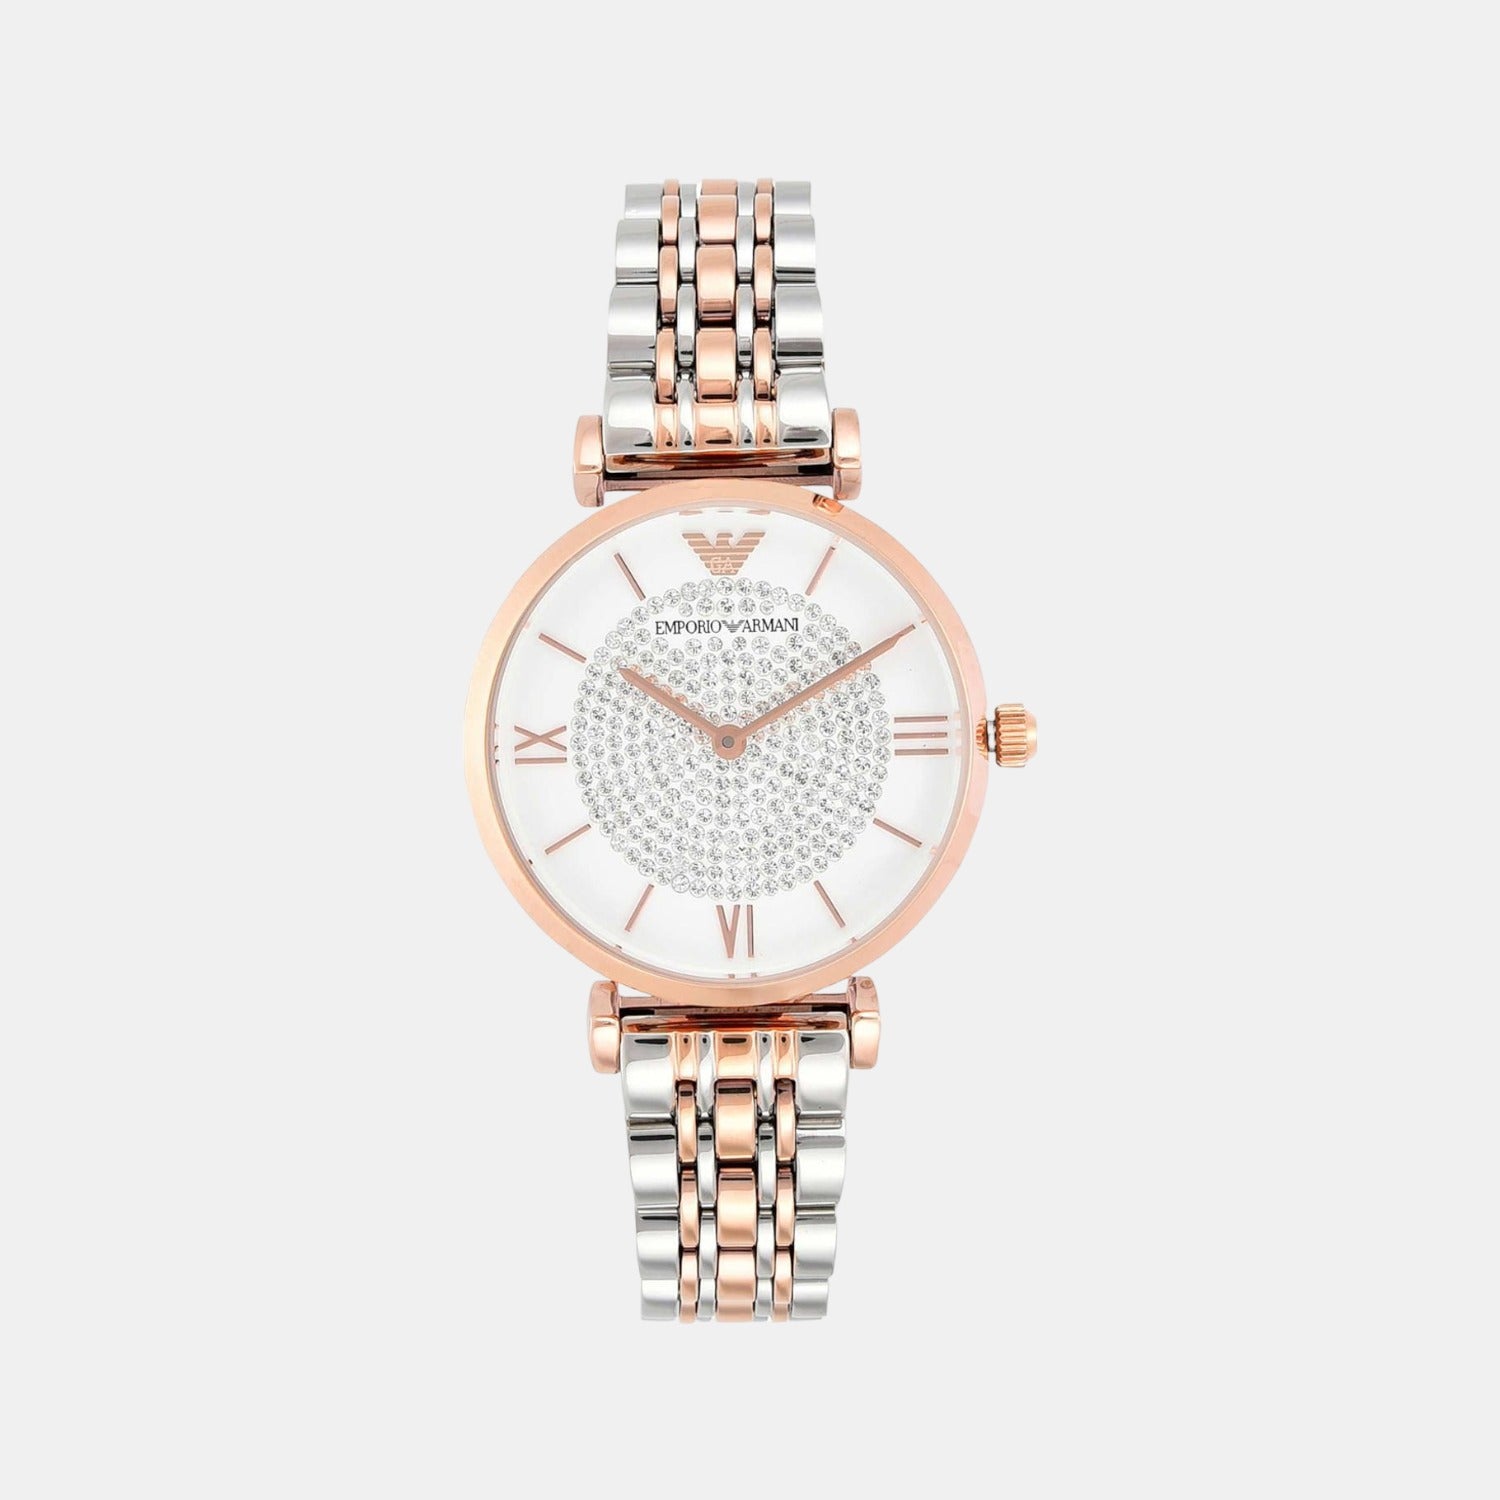 Female White Analog Stainless Steel Watch AR1926